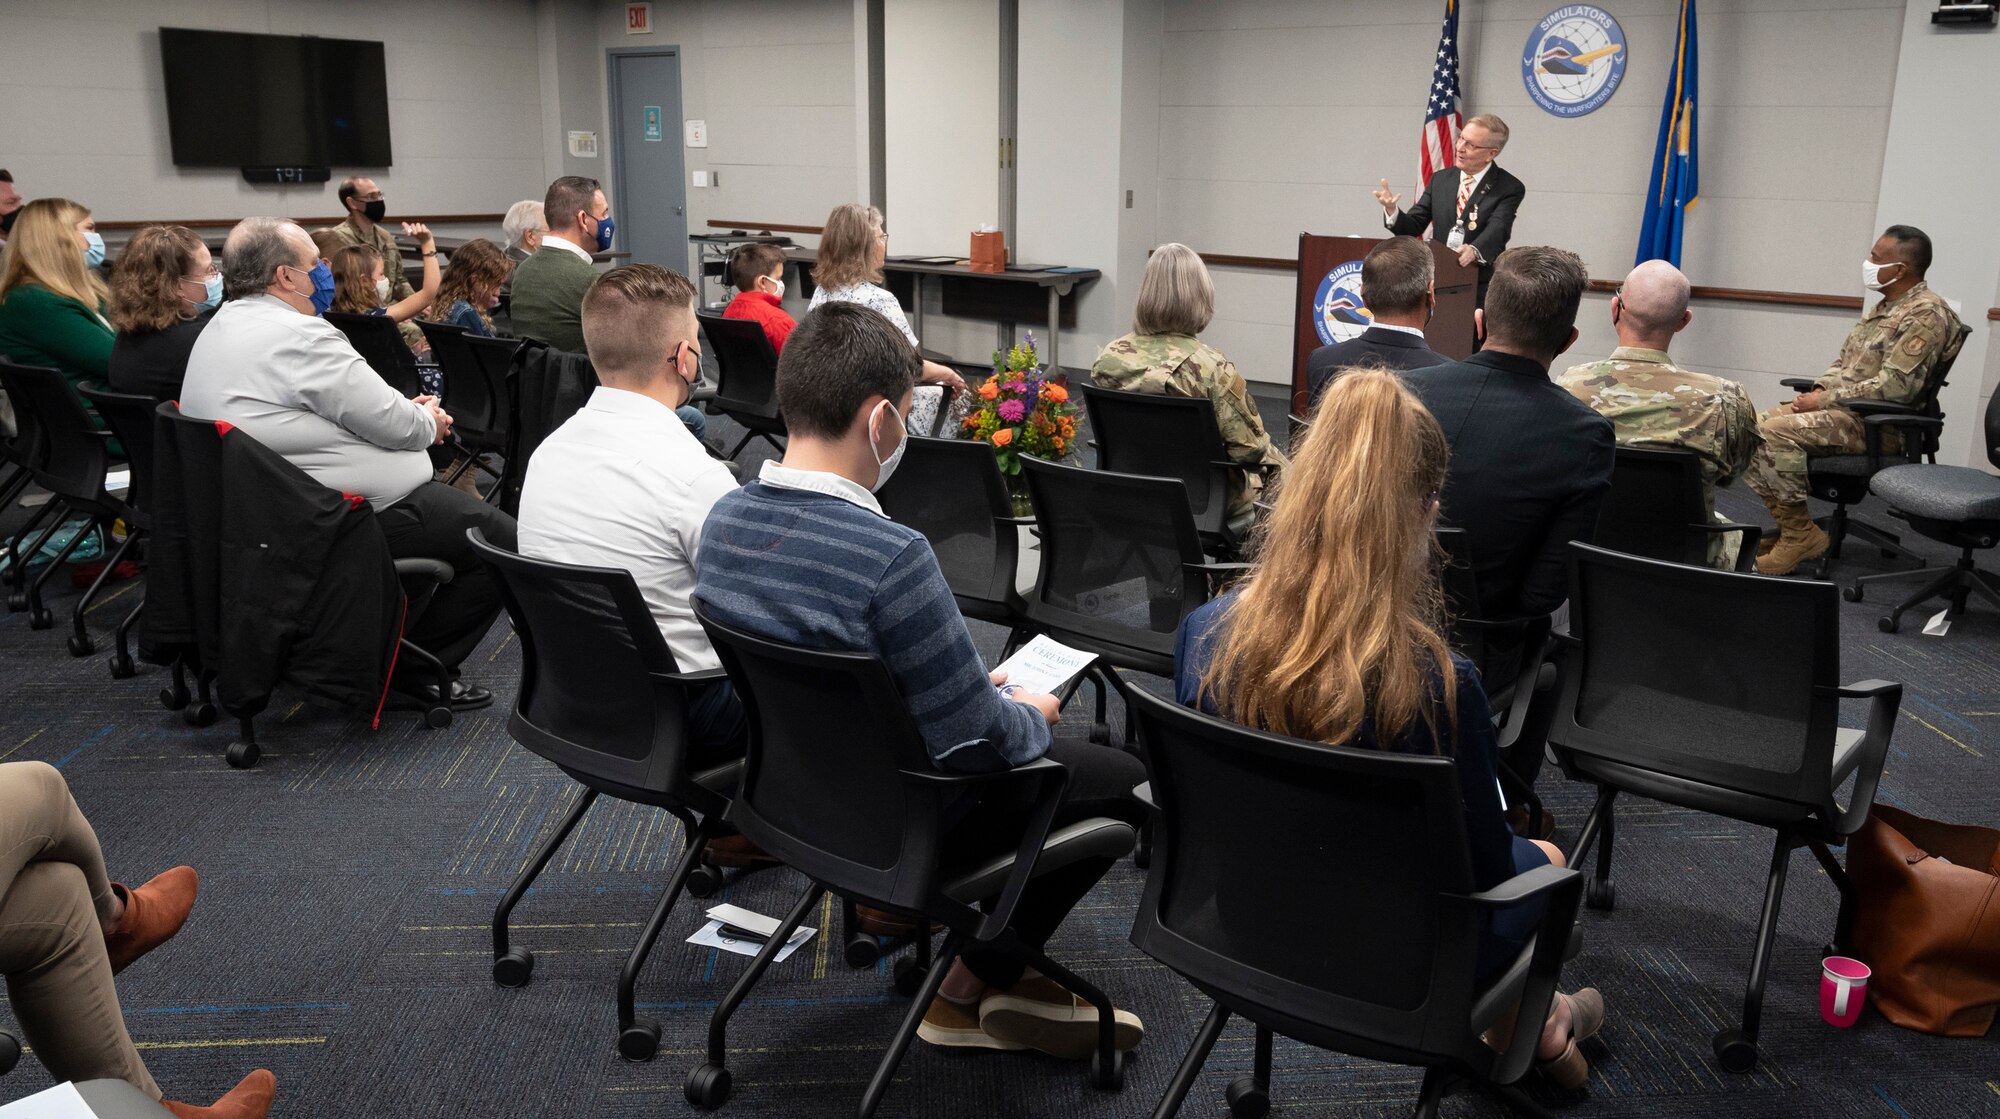 John Carr (standing behind podium), deputy director of the Agile Combat Support Directorate's Simulators Division, gives remarks during his retirement ceremony on at Wright-Patterson Air Force Base, Ohio, Oct. 29, 2021.